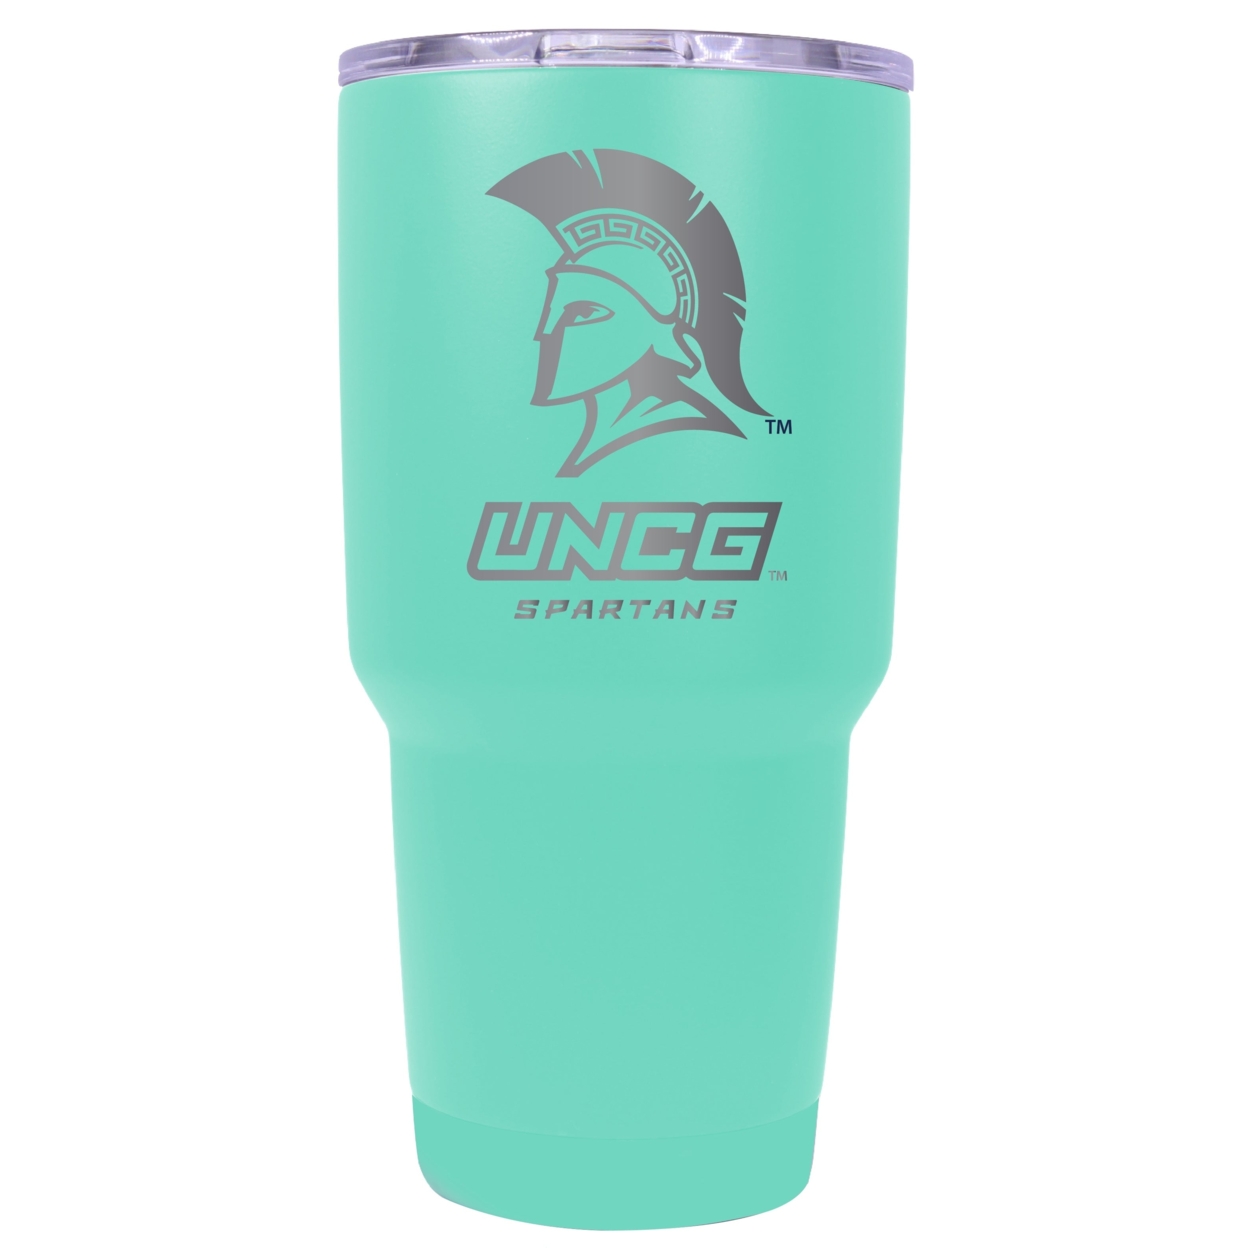 North Carolina Greensboro Spartans 24 Oz Laser Engraved Stainless Steel Insulated Tumbler - Choose Your Color. - Navy